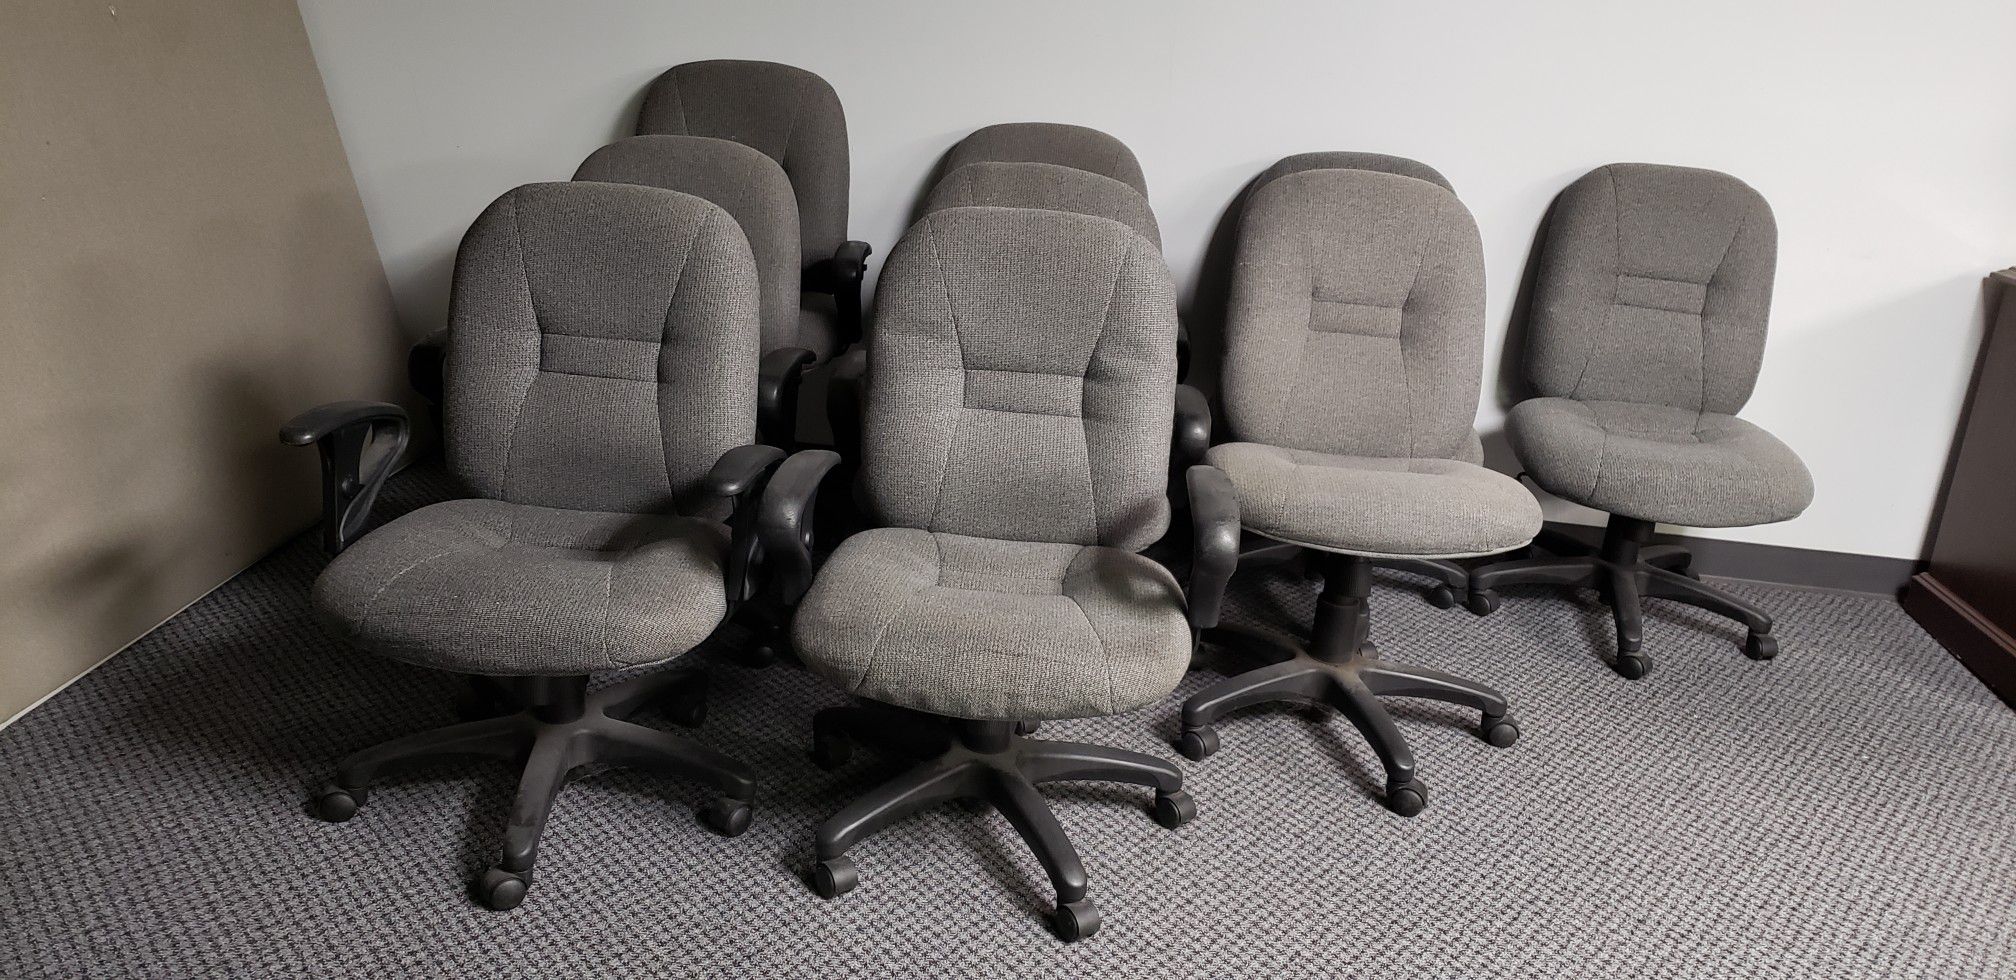 Office Desk Chairs. (9)